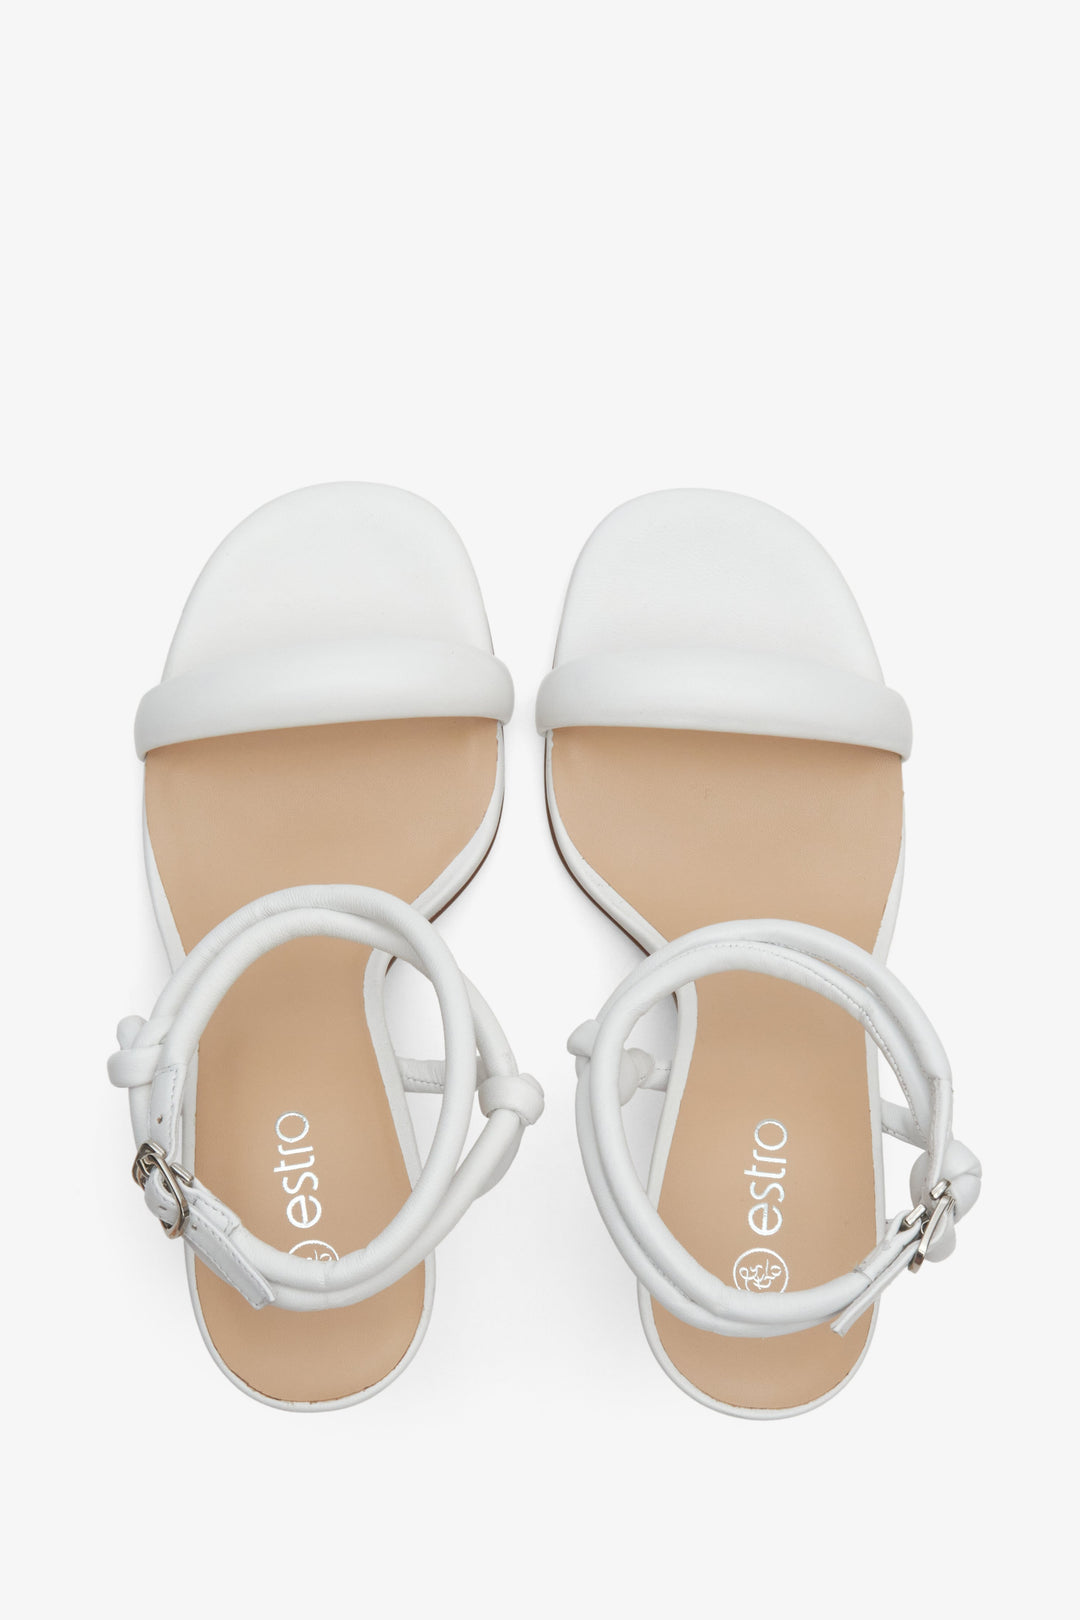 Women's white leather strappy sandals of Estro brand - presentation from above.